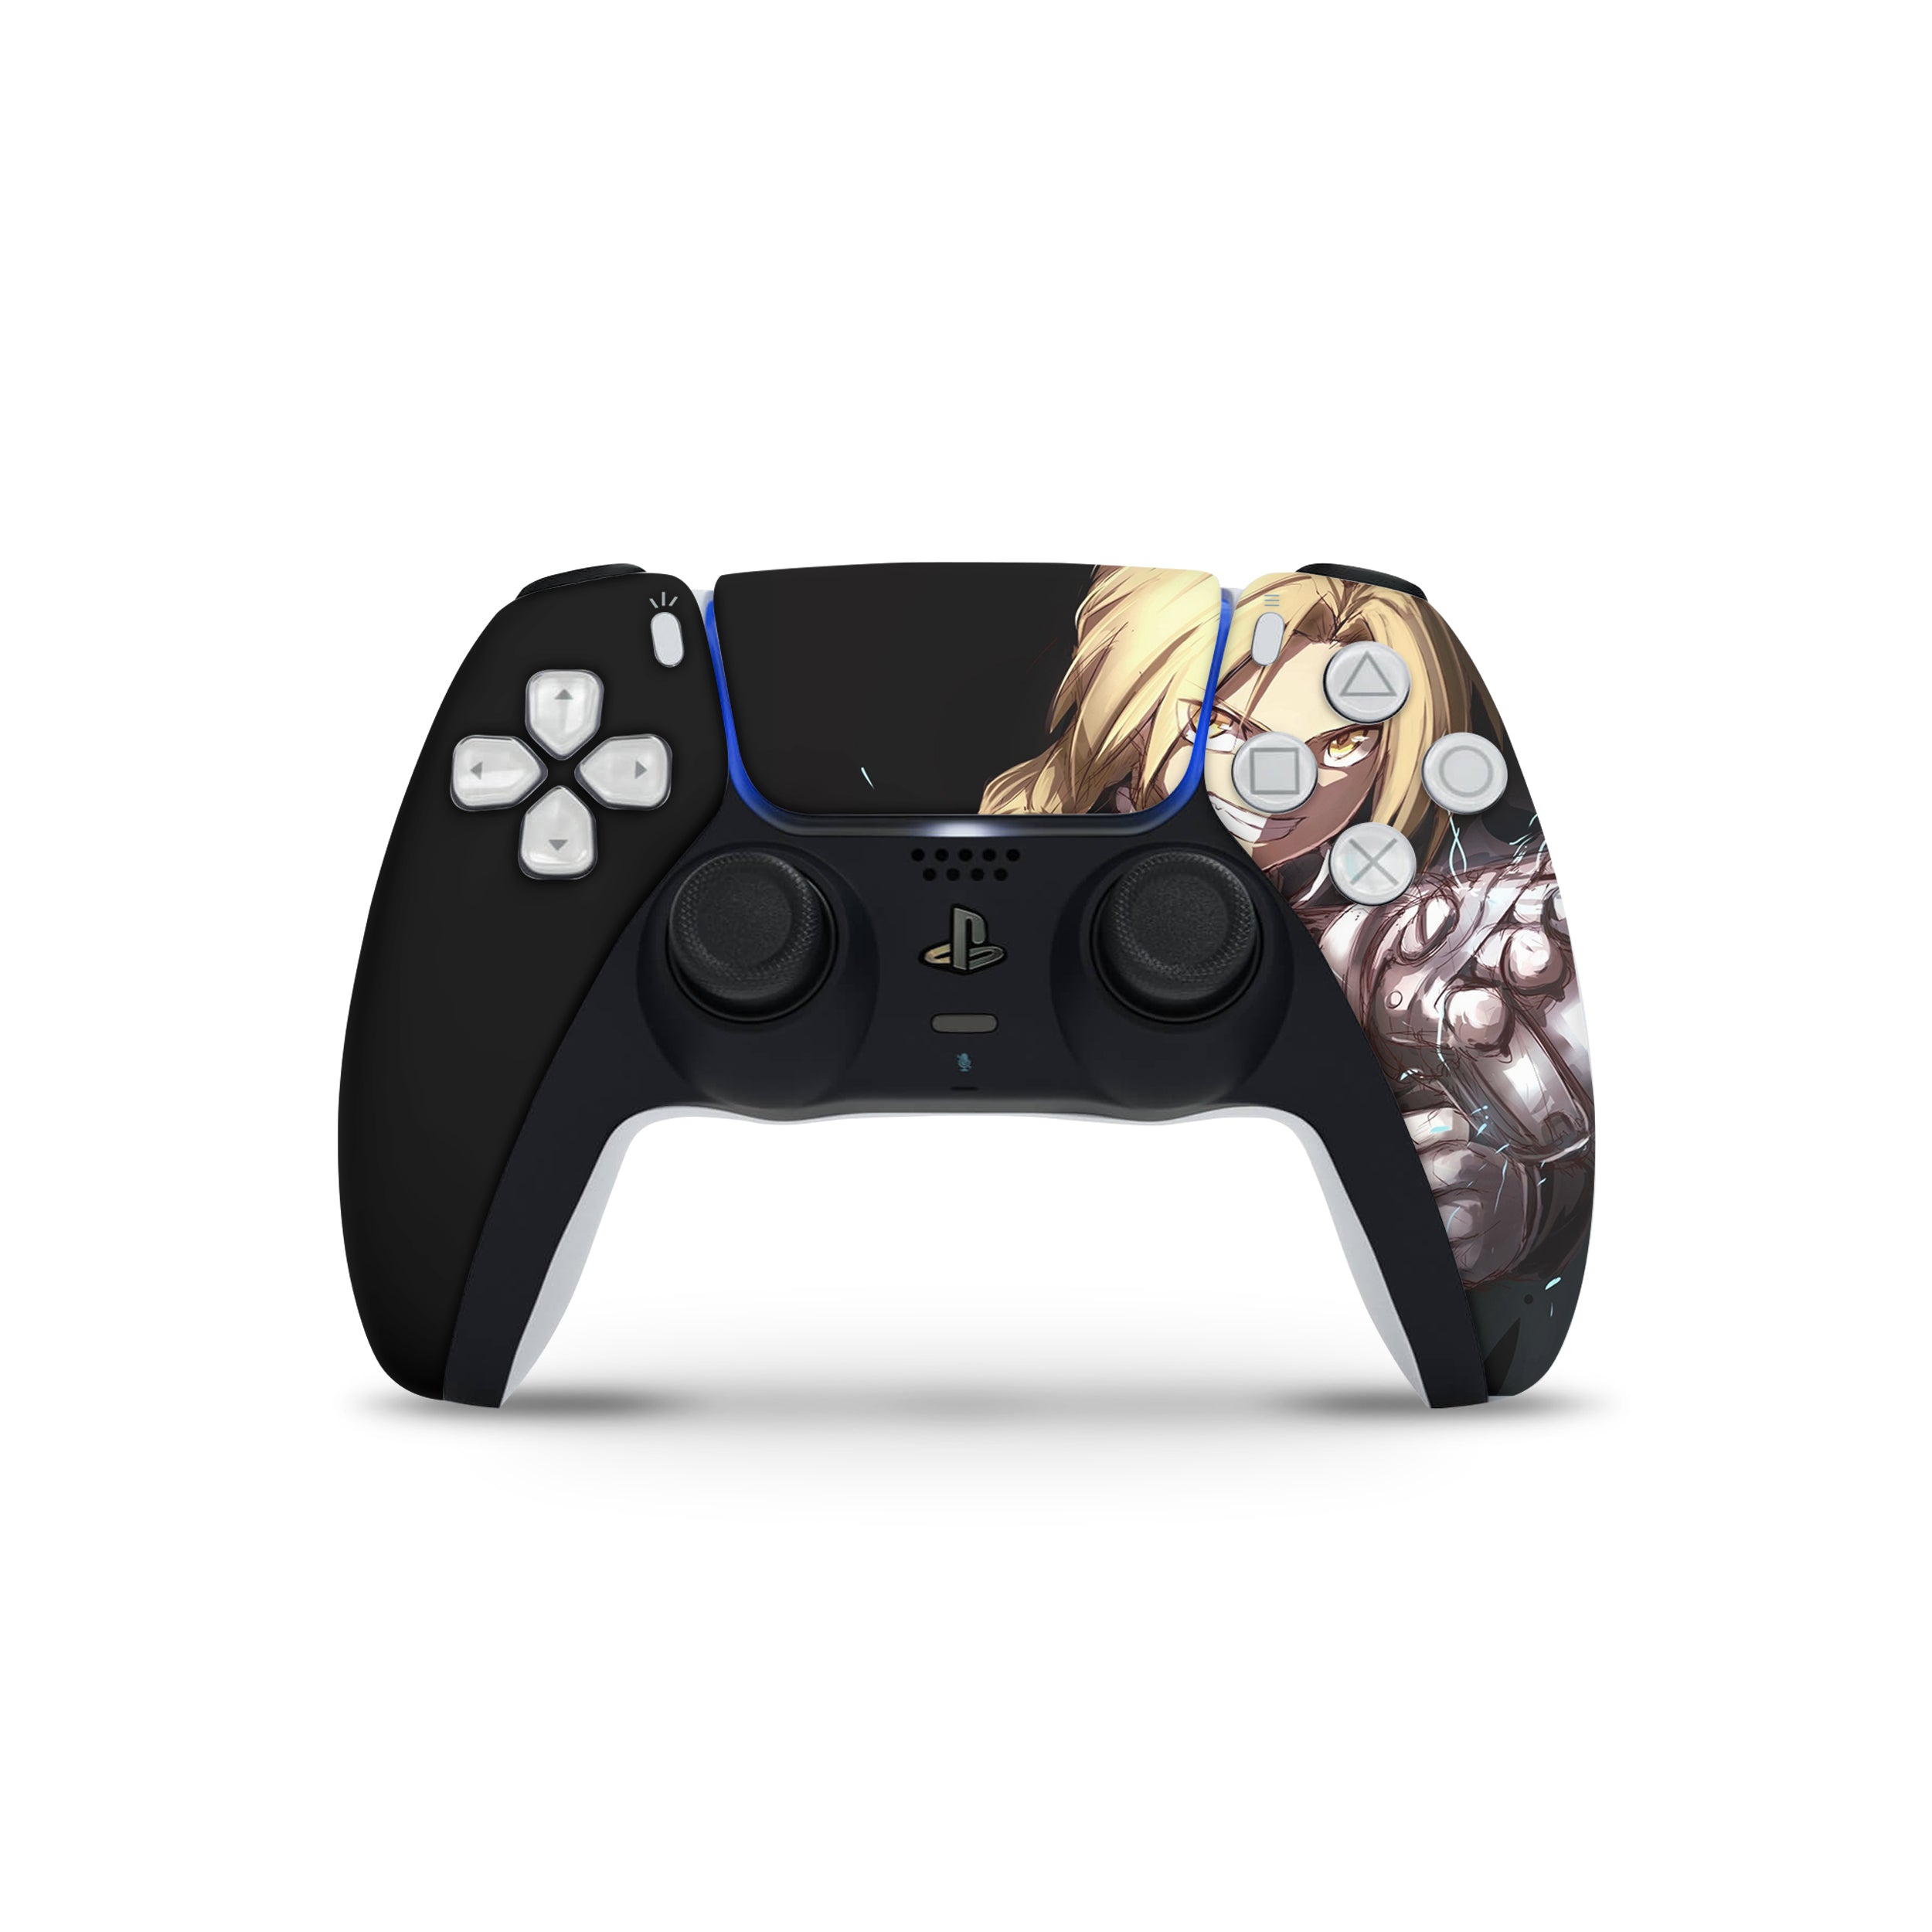 A video game skin featuring a Fullmetal Alchemist Edward Elric design for the PS5 DualSense Controller.